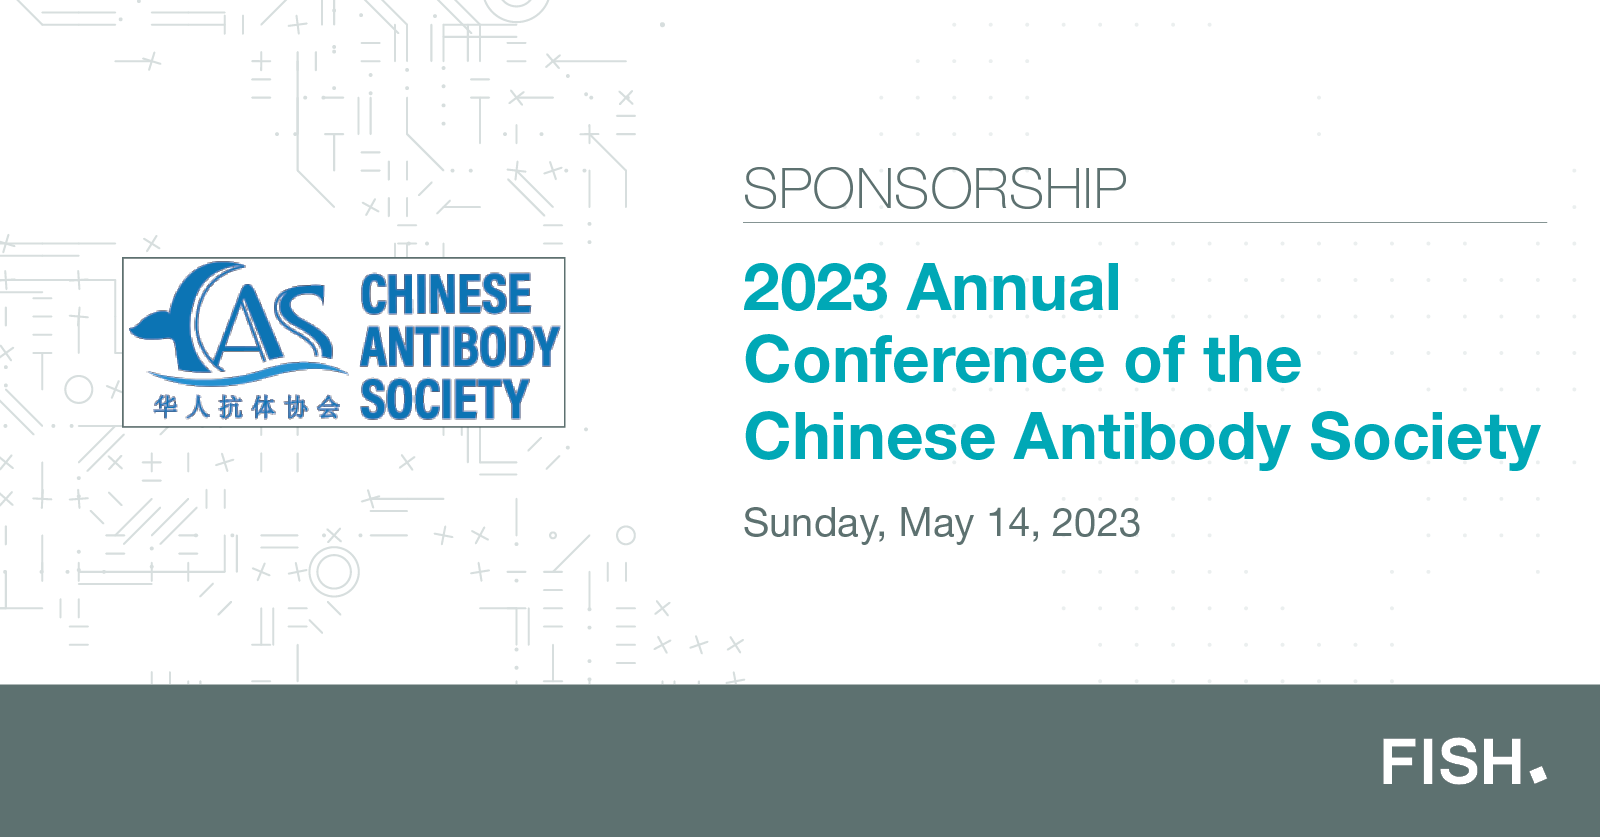 2023 Annual Conference of the Chinese Antibody Society